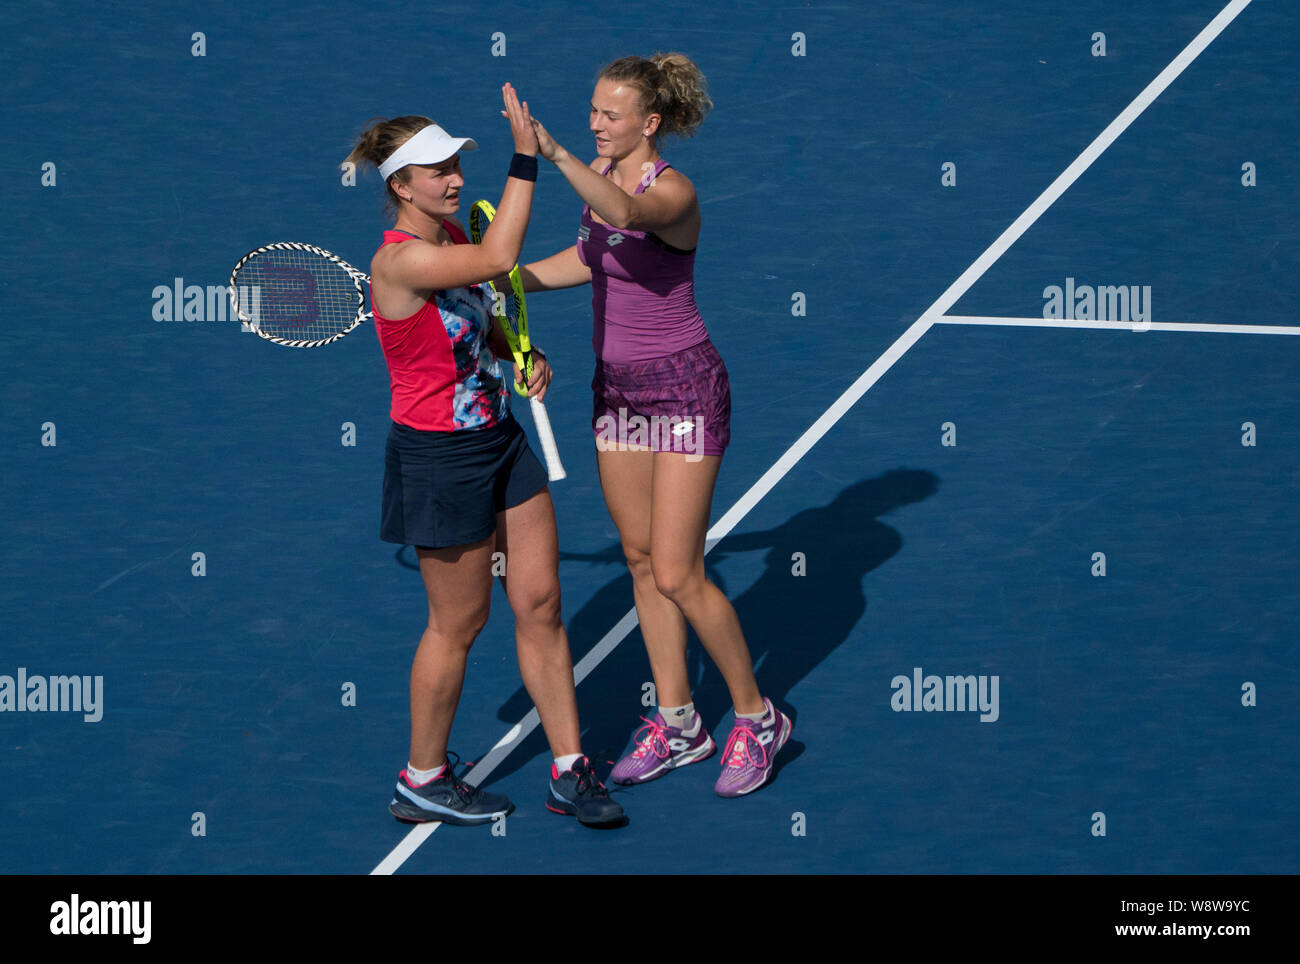 Toronto, Canada. 11th Aug, 2019. Barbora Krejcikova (L) and Katerina Siniakova of the Czech Republic celebrate victory after winning the women's doubles final against Anna-Lena Groenefeld of Germany and Demi Schuurs of the Netherlands at the 2019 Rogers Cup in Toronto, Canada, Aug. 11, 2019. Credit: Zou Zheng/Xinhua/Alamy Live News Stock Photo